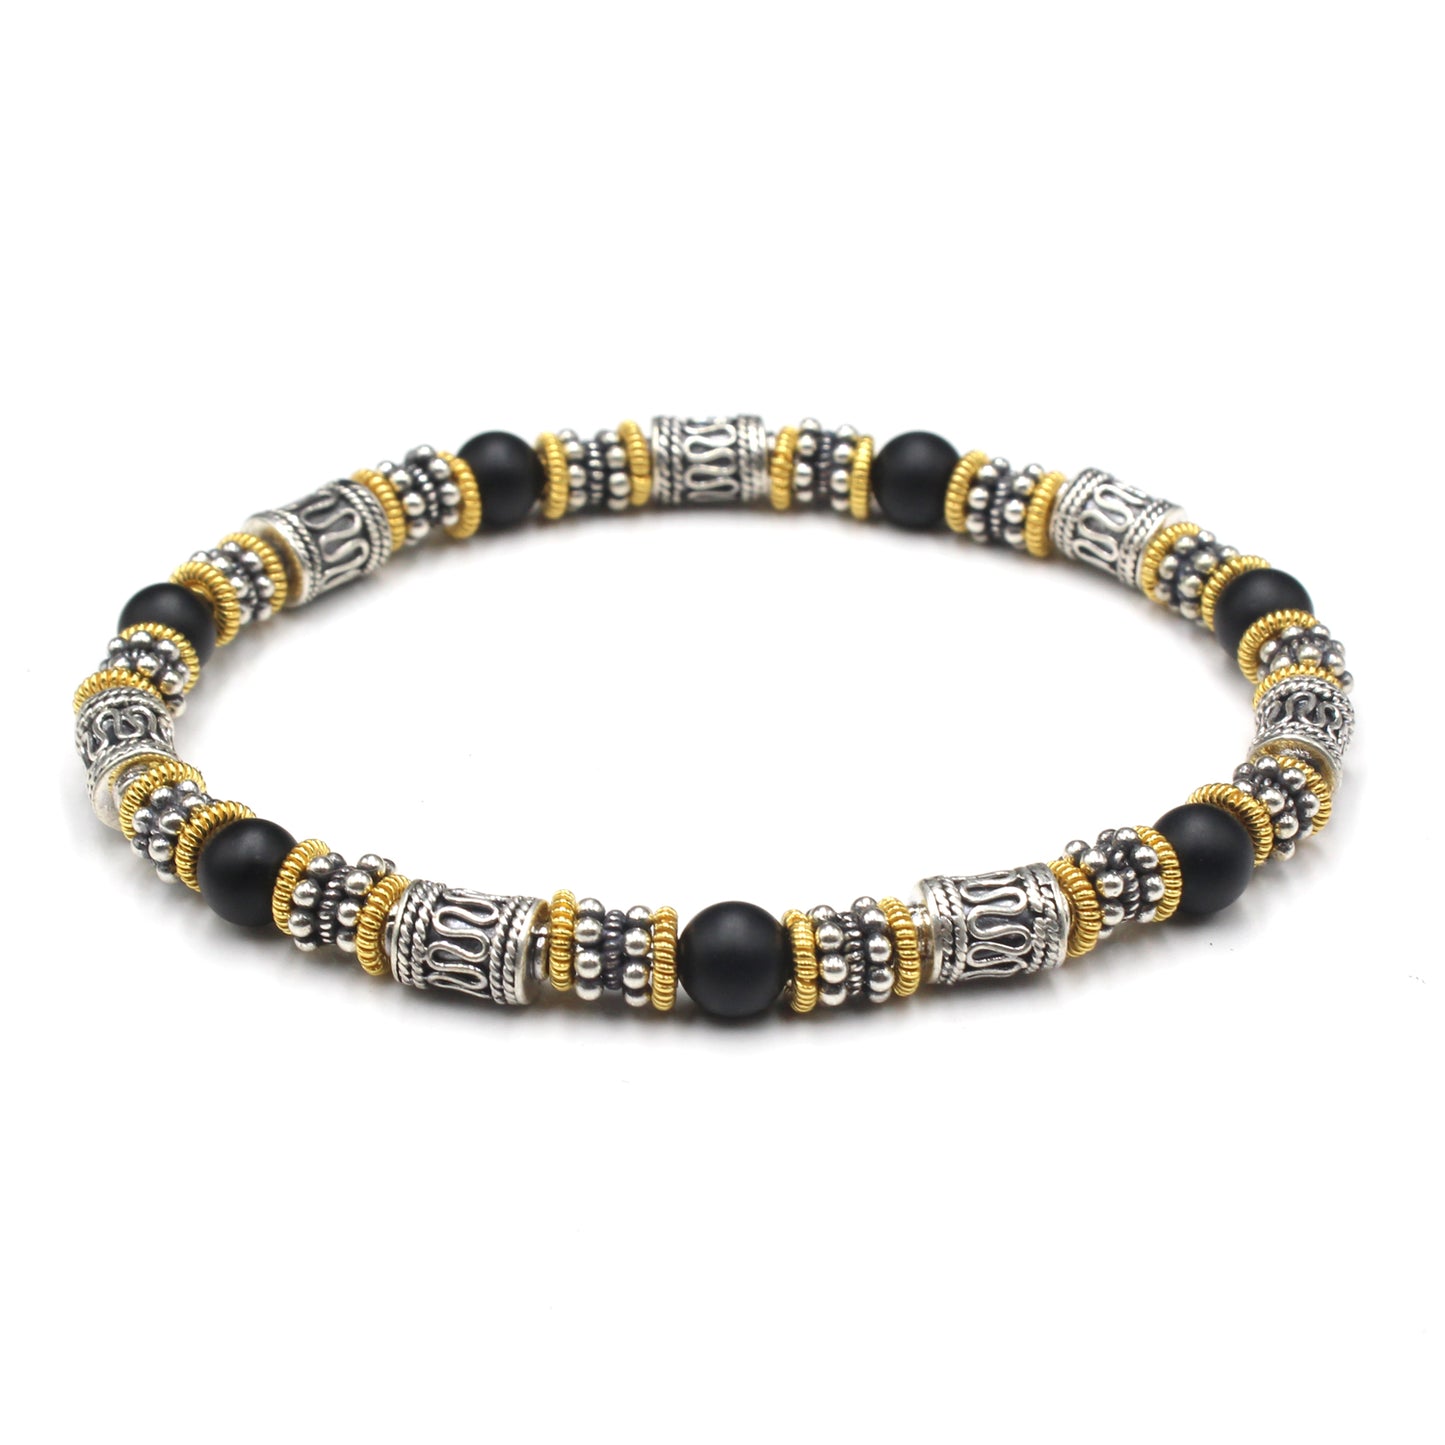 Onyx, Sterling Silver, and Gold Vermeil